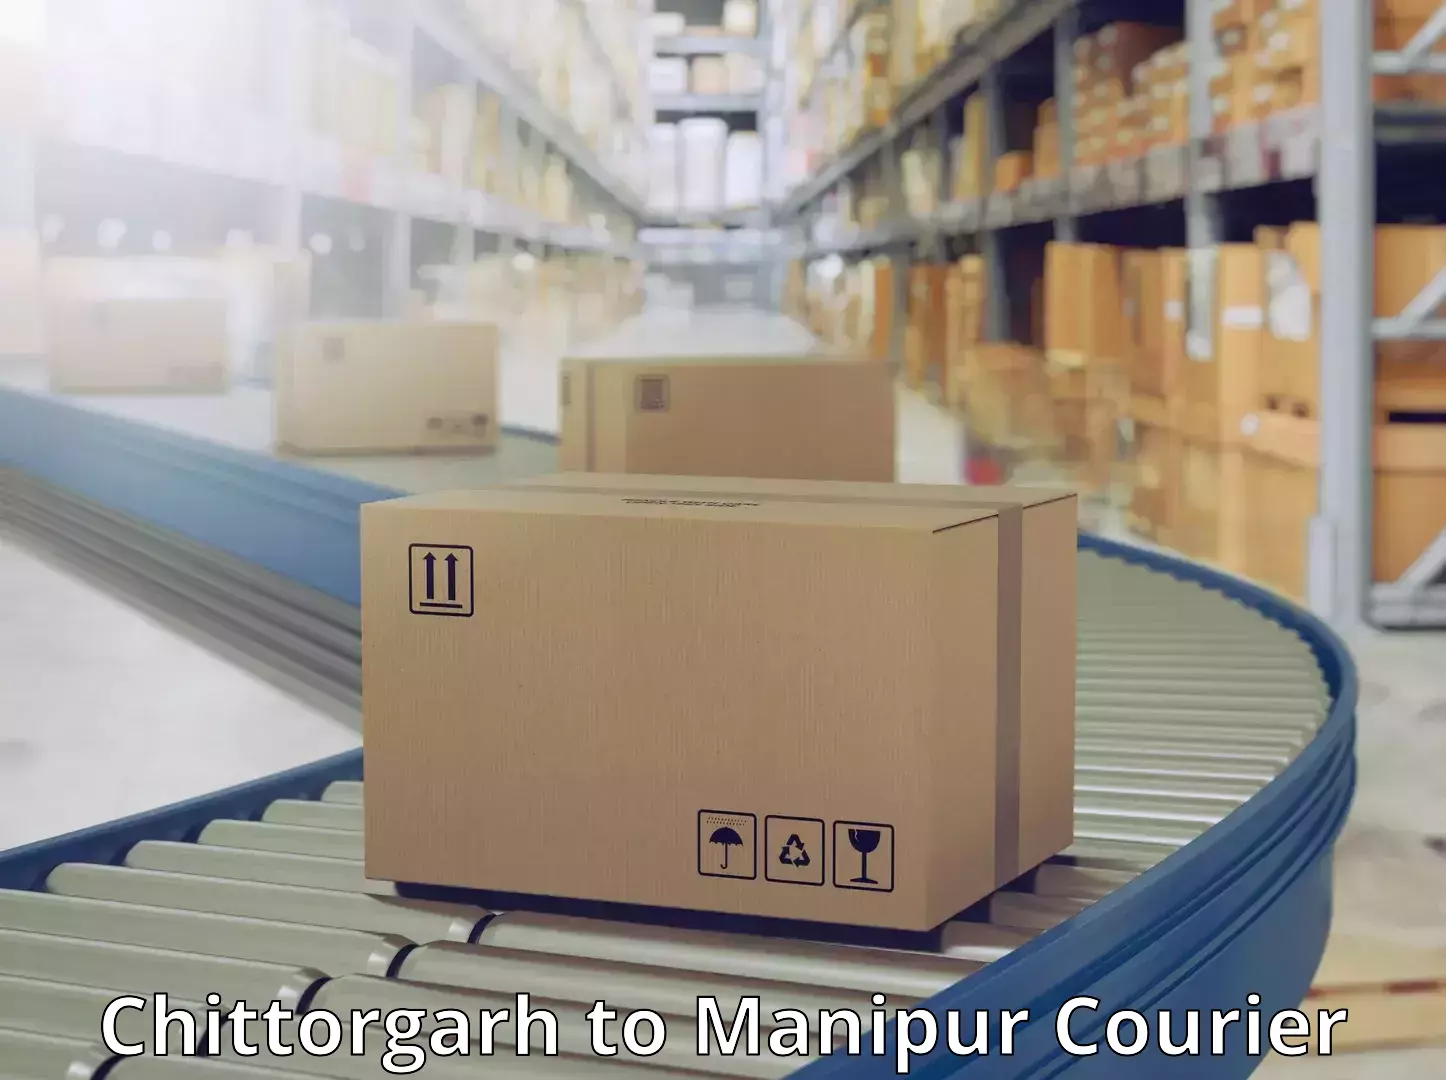 Fast shipping solutions Chittorgarh to Chandel